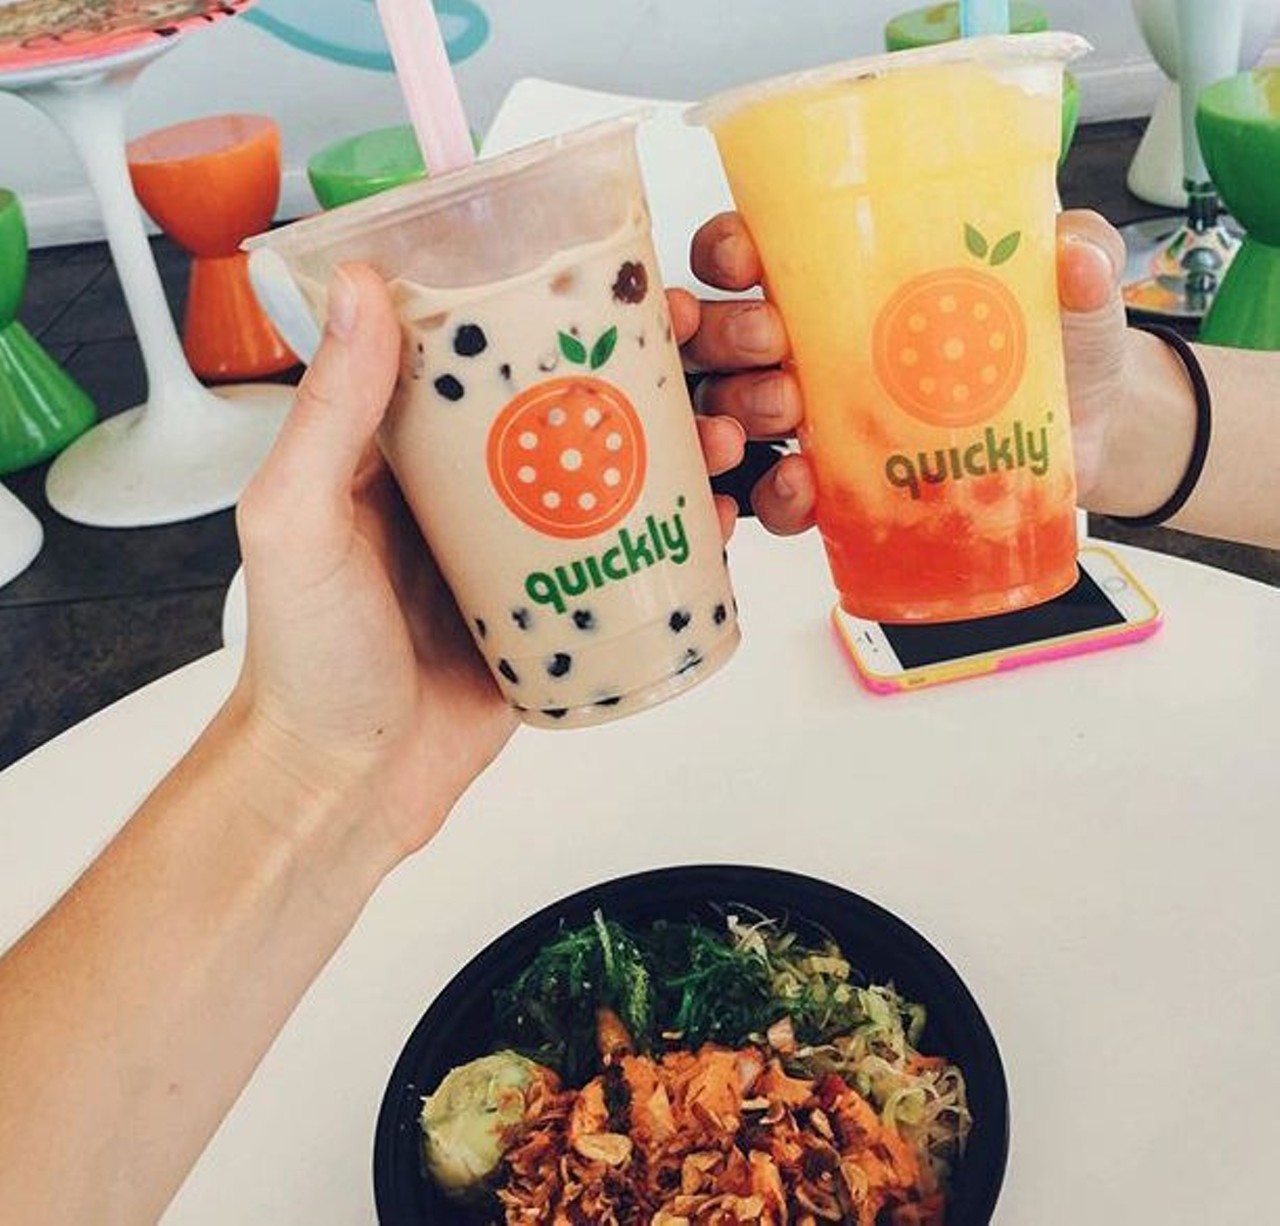 Quickly Boba & Snow
3214 E. Colonial Dr., (407) 270-4570
The dessert place, known for its boba, also serves poke bowls, a traditional Hawaiian meal. Customers have the option of getting salmon, tuna, yellowtail or ahi tuna on their poke bowl.
Photo via allysongregg/Instagram